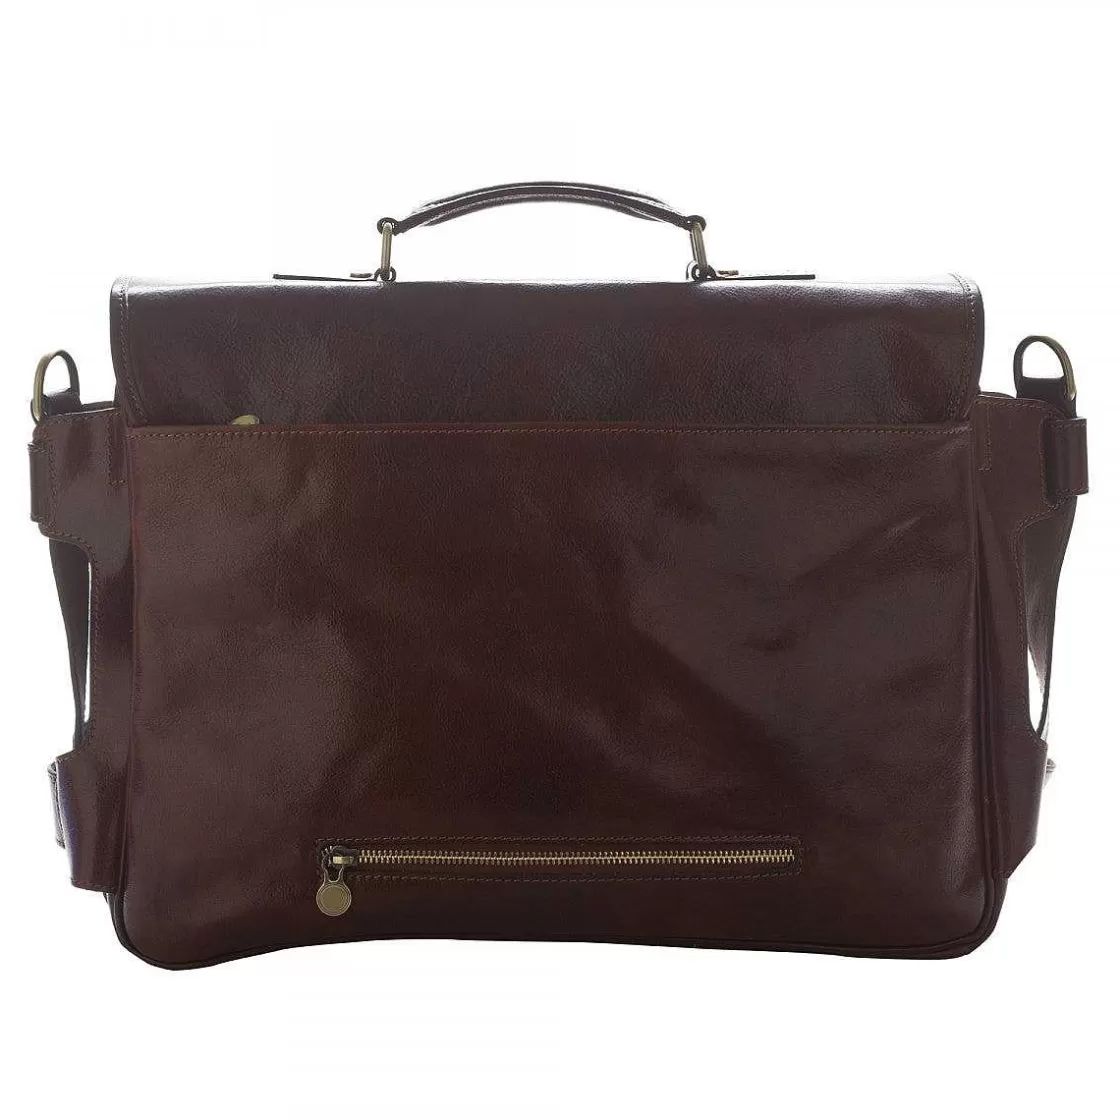 Leonardo Deluxe Briefcase In Full Grain Leather With Front Pockets And Adjustable Shoulder Strap Discount